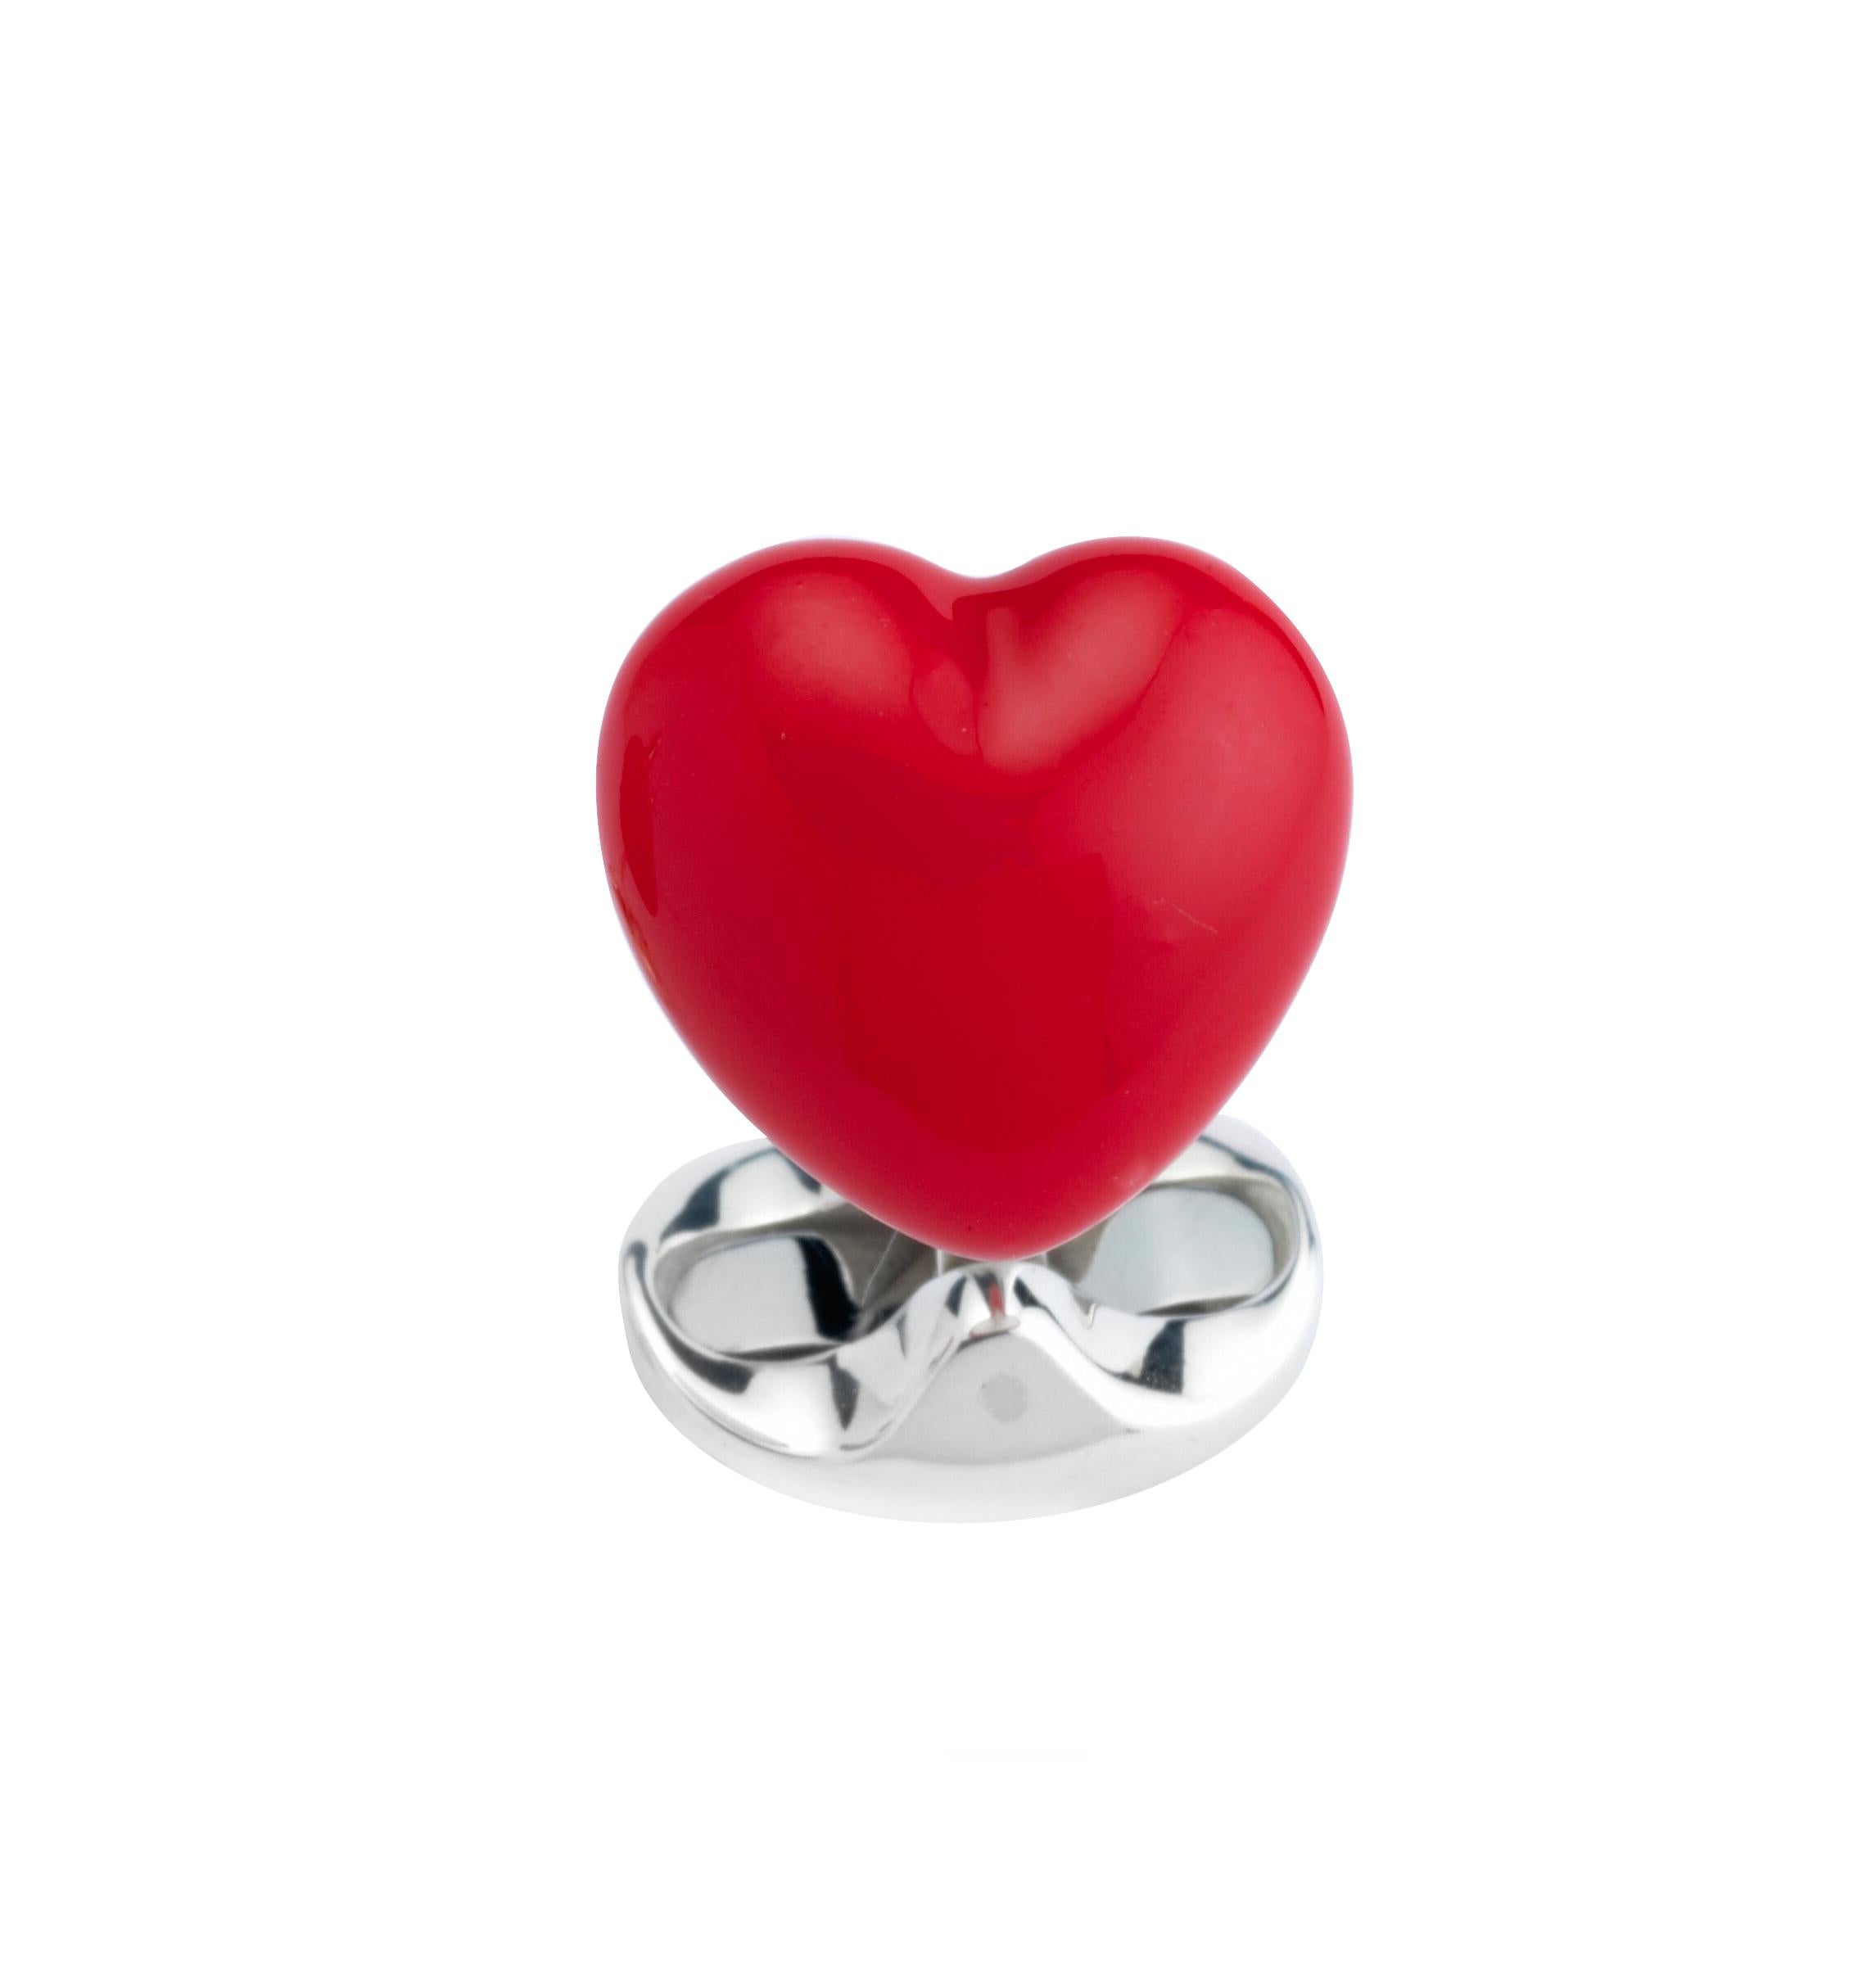 Contemporary Deakin & Francis Sterling Silver Good and Bad Heart Cufflinks For Sale